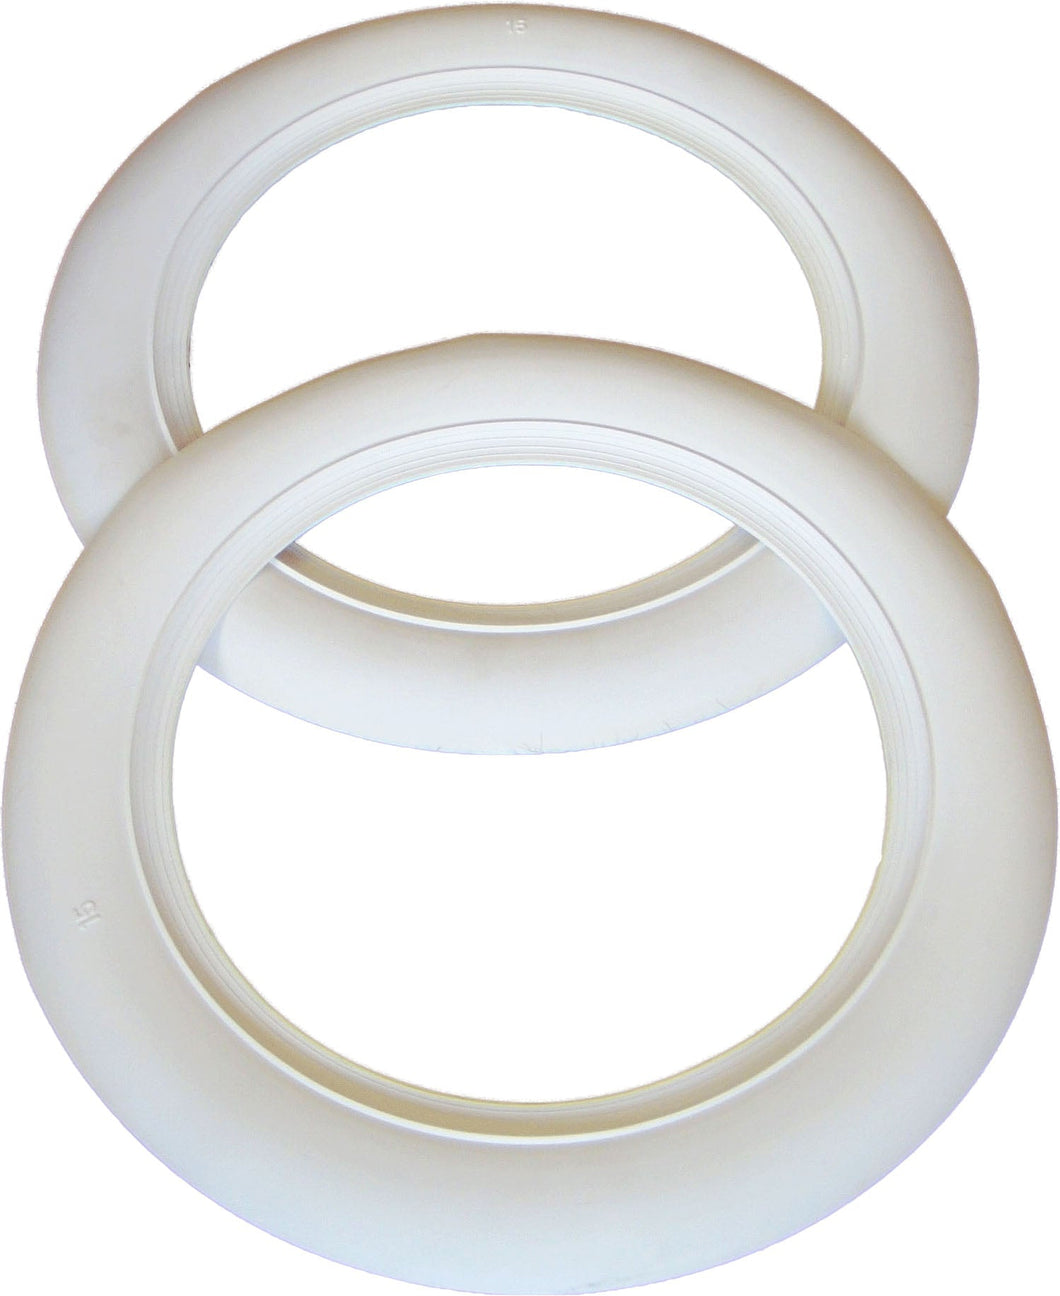 2 x 13'' Atlas Whitewall Inserts (set of 2) - 1 1/2'' (45mm) wide